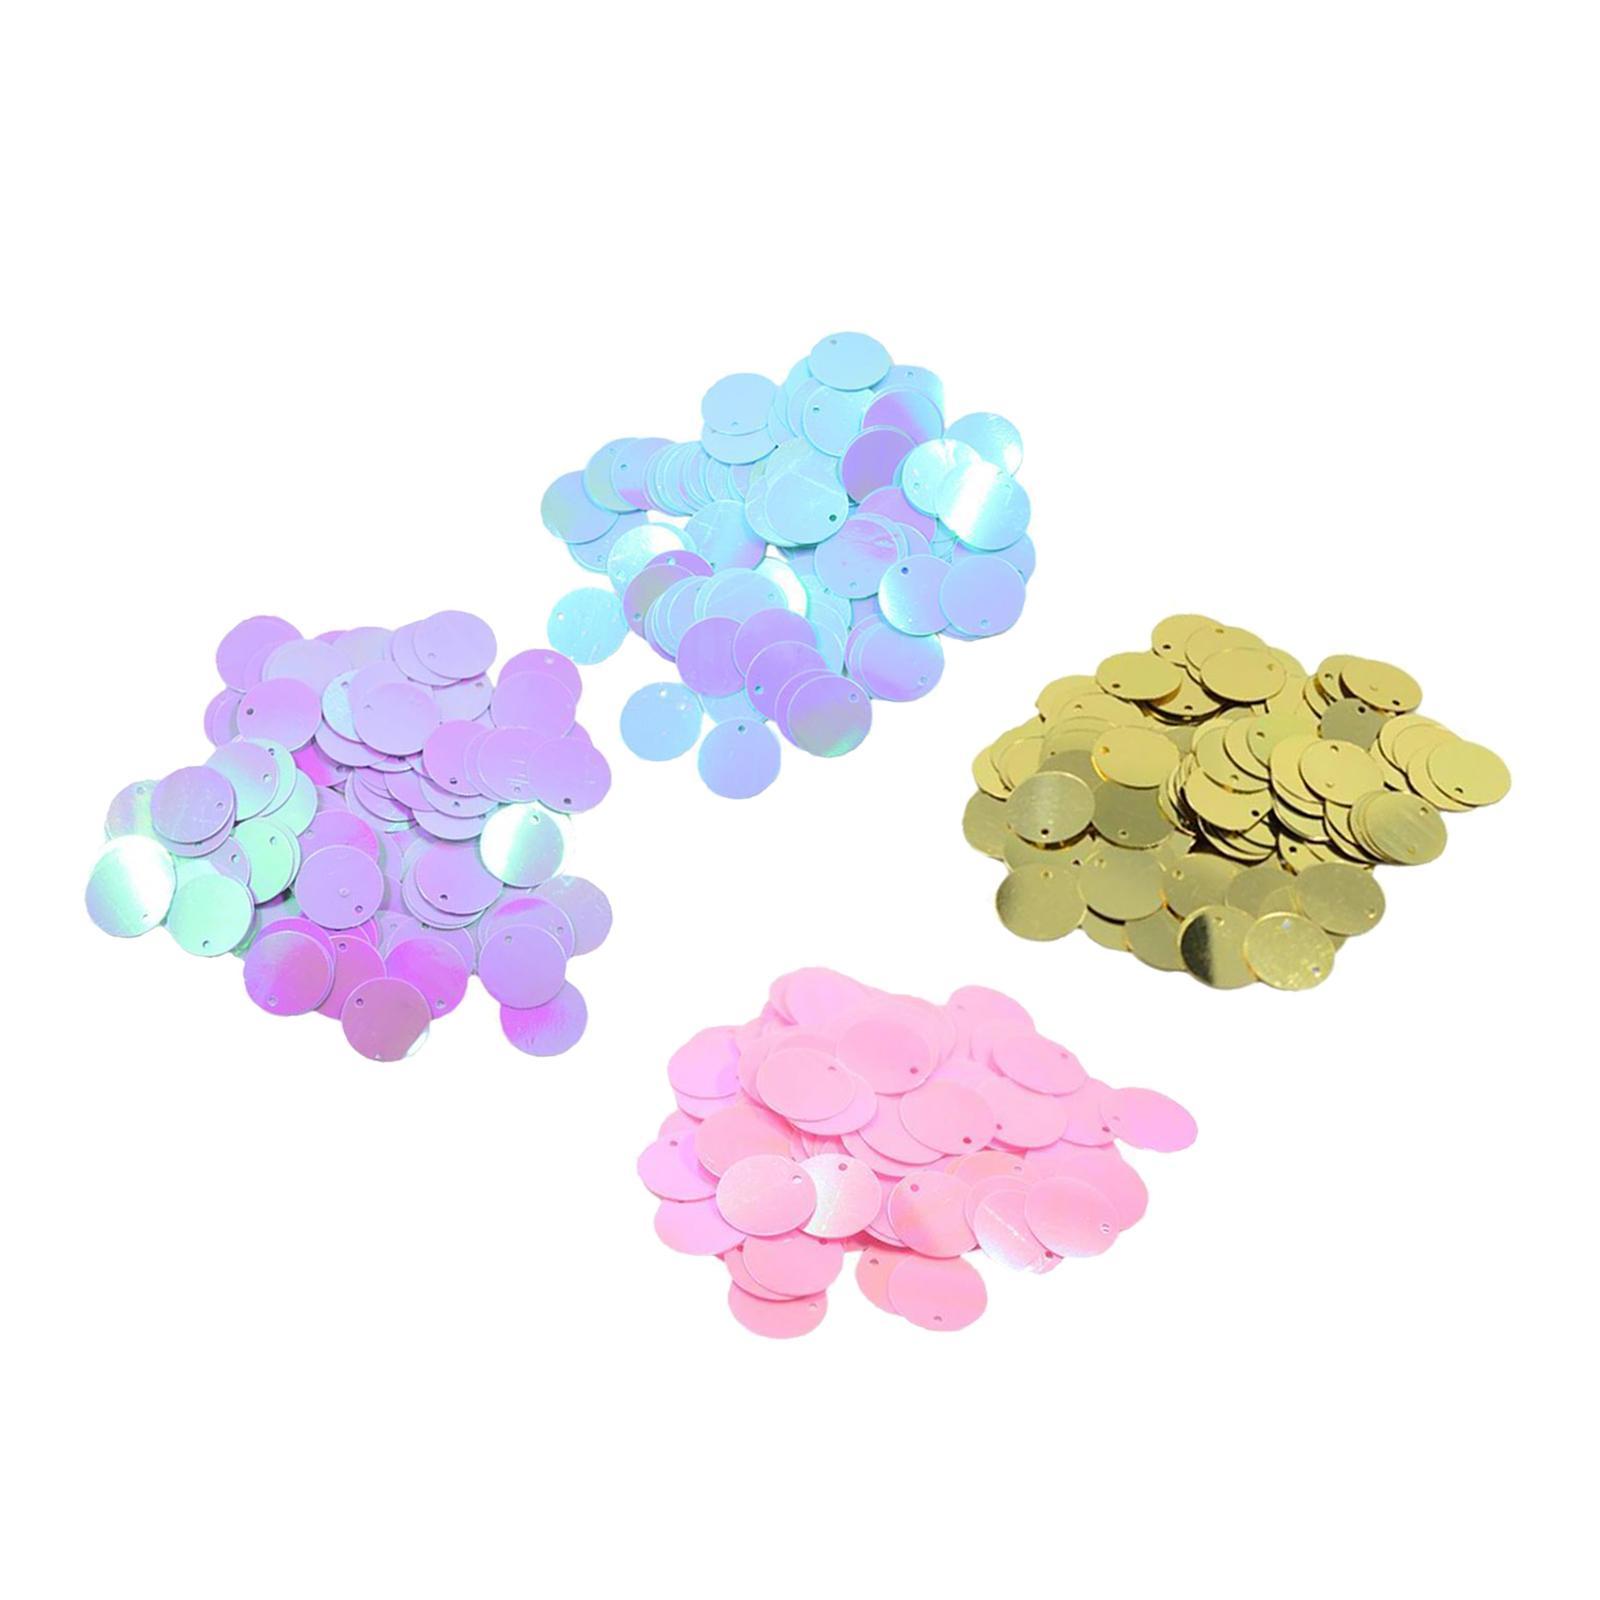 520Pcs DIY Shiny Round Loose Sequins Paillettes Sewing DIY Crafts